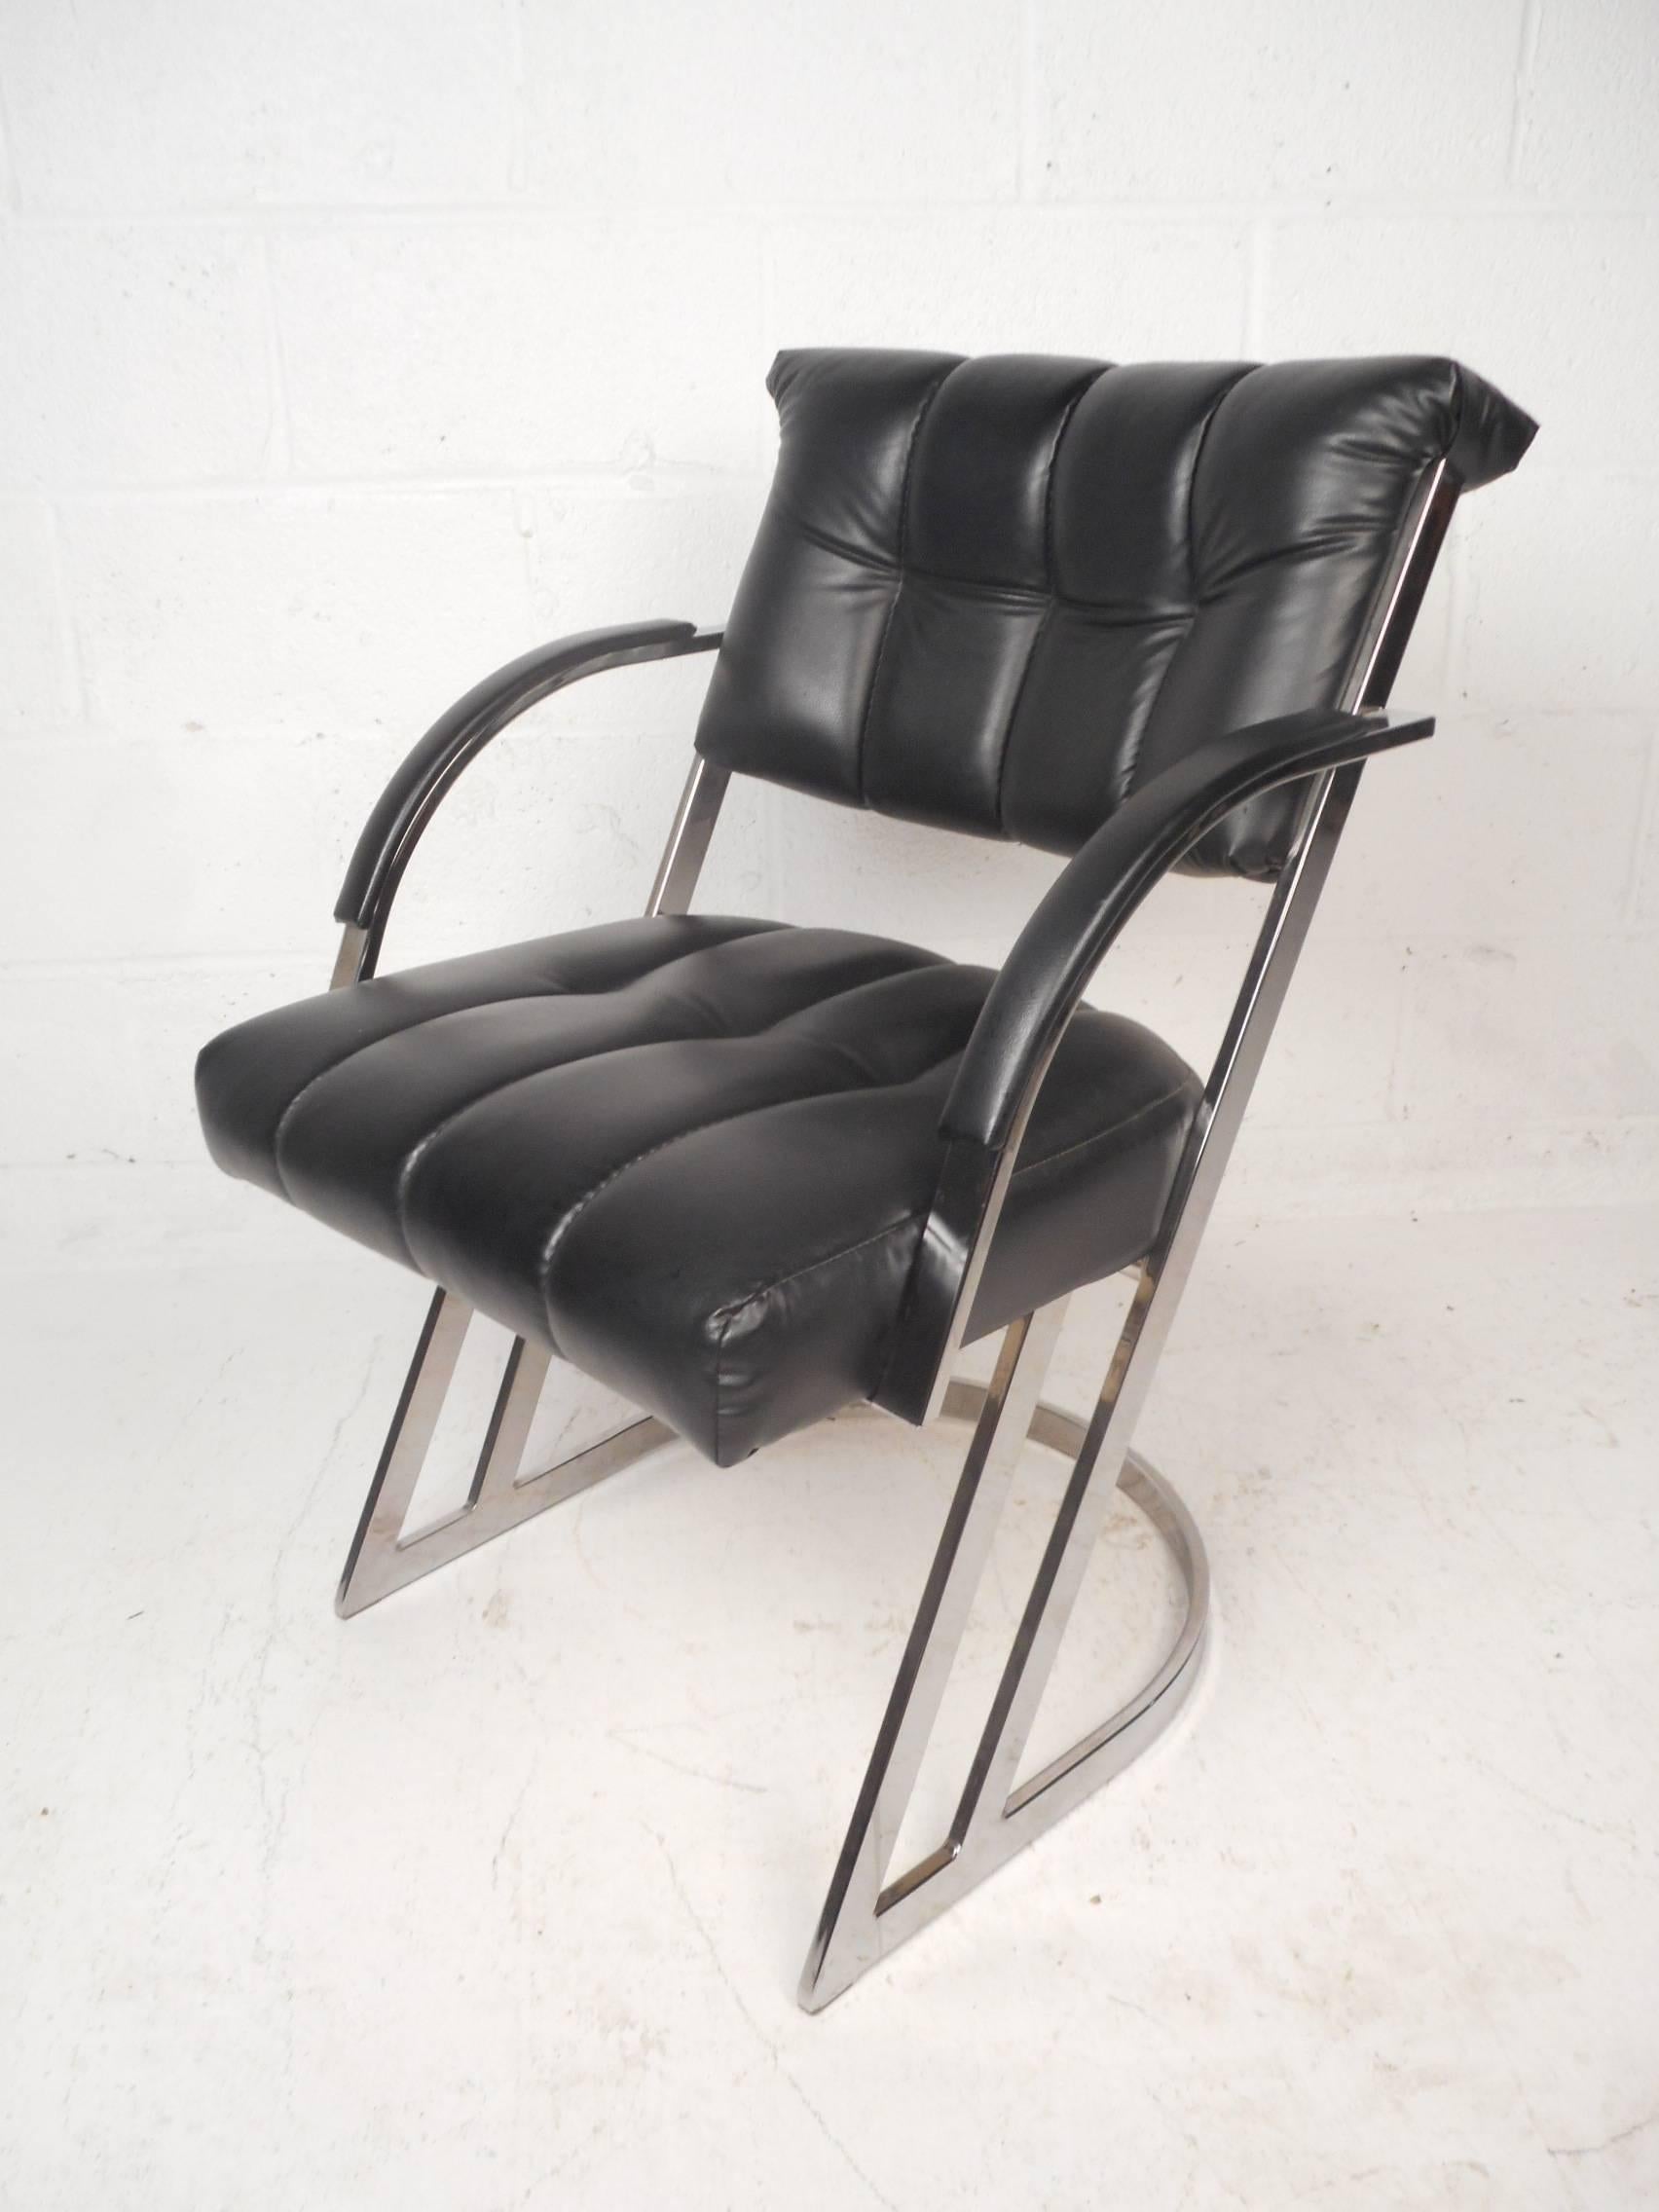 This gorgeous set of four vintage modern chairs feature a heavy cantilever chrome frame with padded armrests. A sleek design with an overstuffed seat and backrest ensuring optimal comfort without sacrificing style. The arch shaped arm rests and